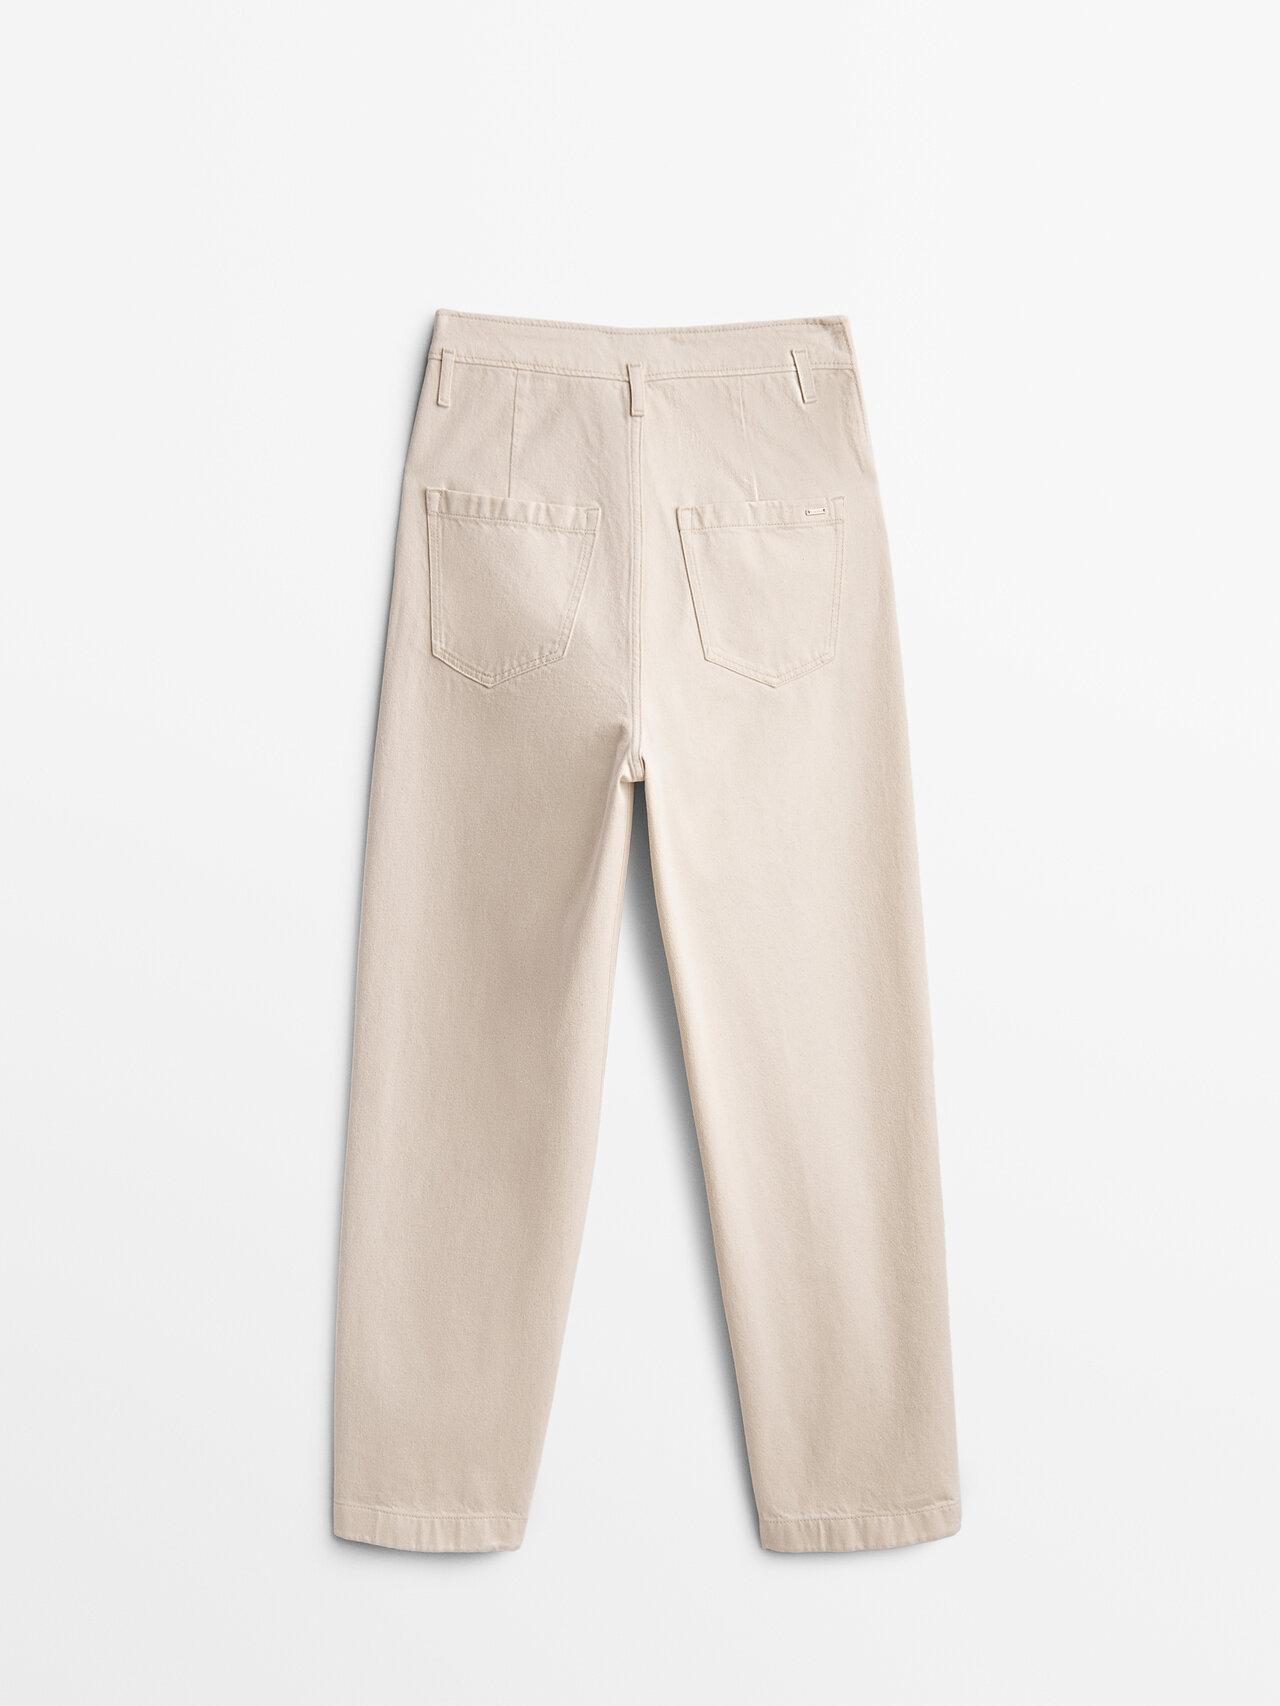 MASSIMO DUTTI Paperbag Jeans in Natural | Lyst